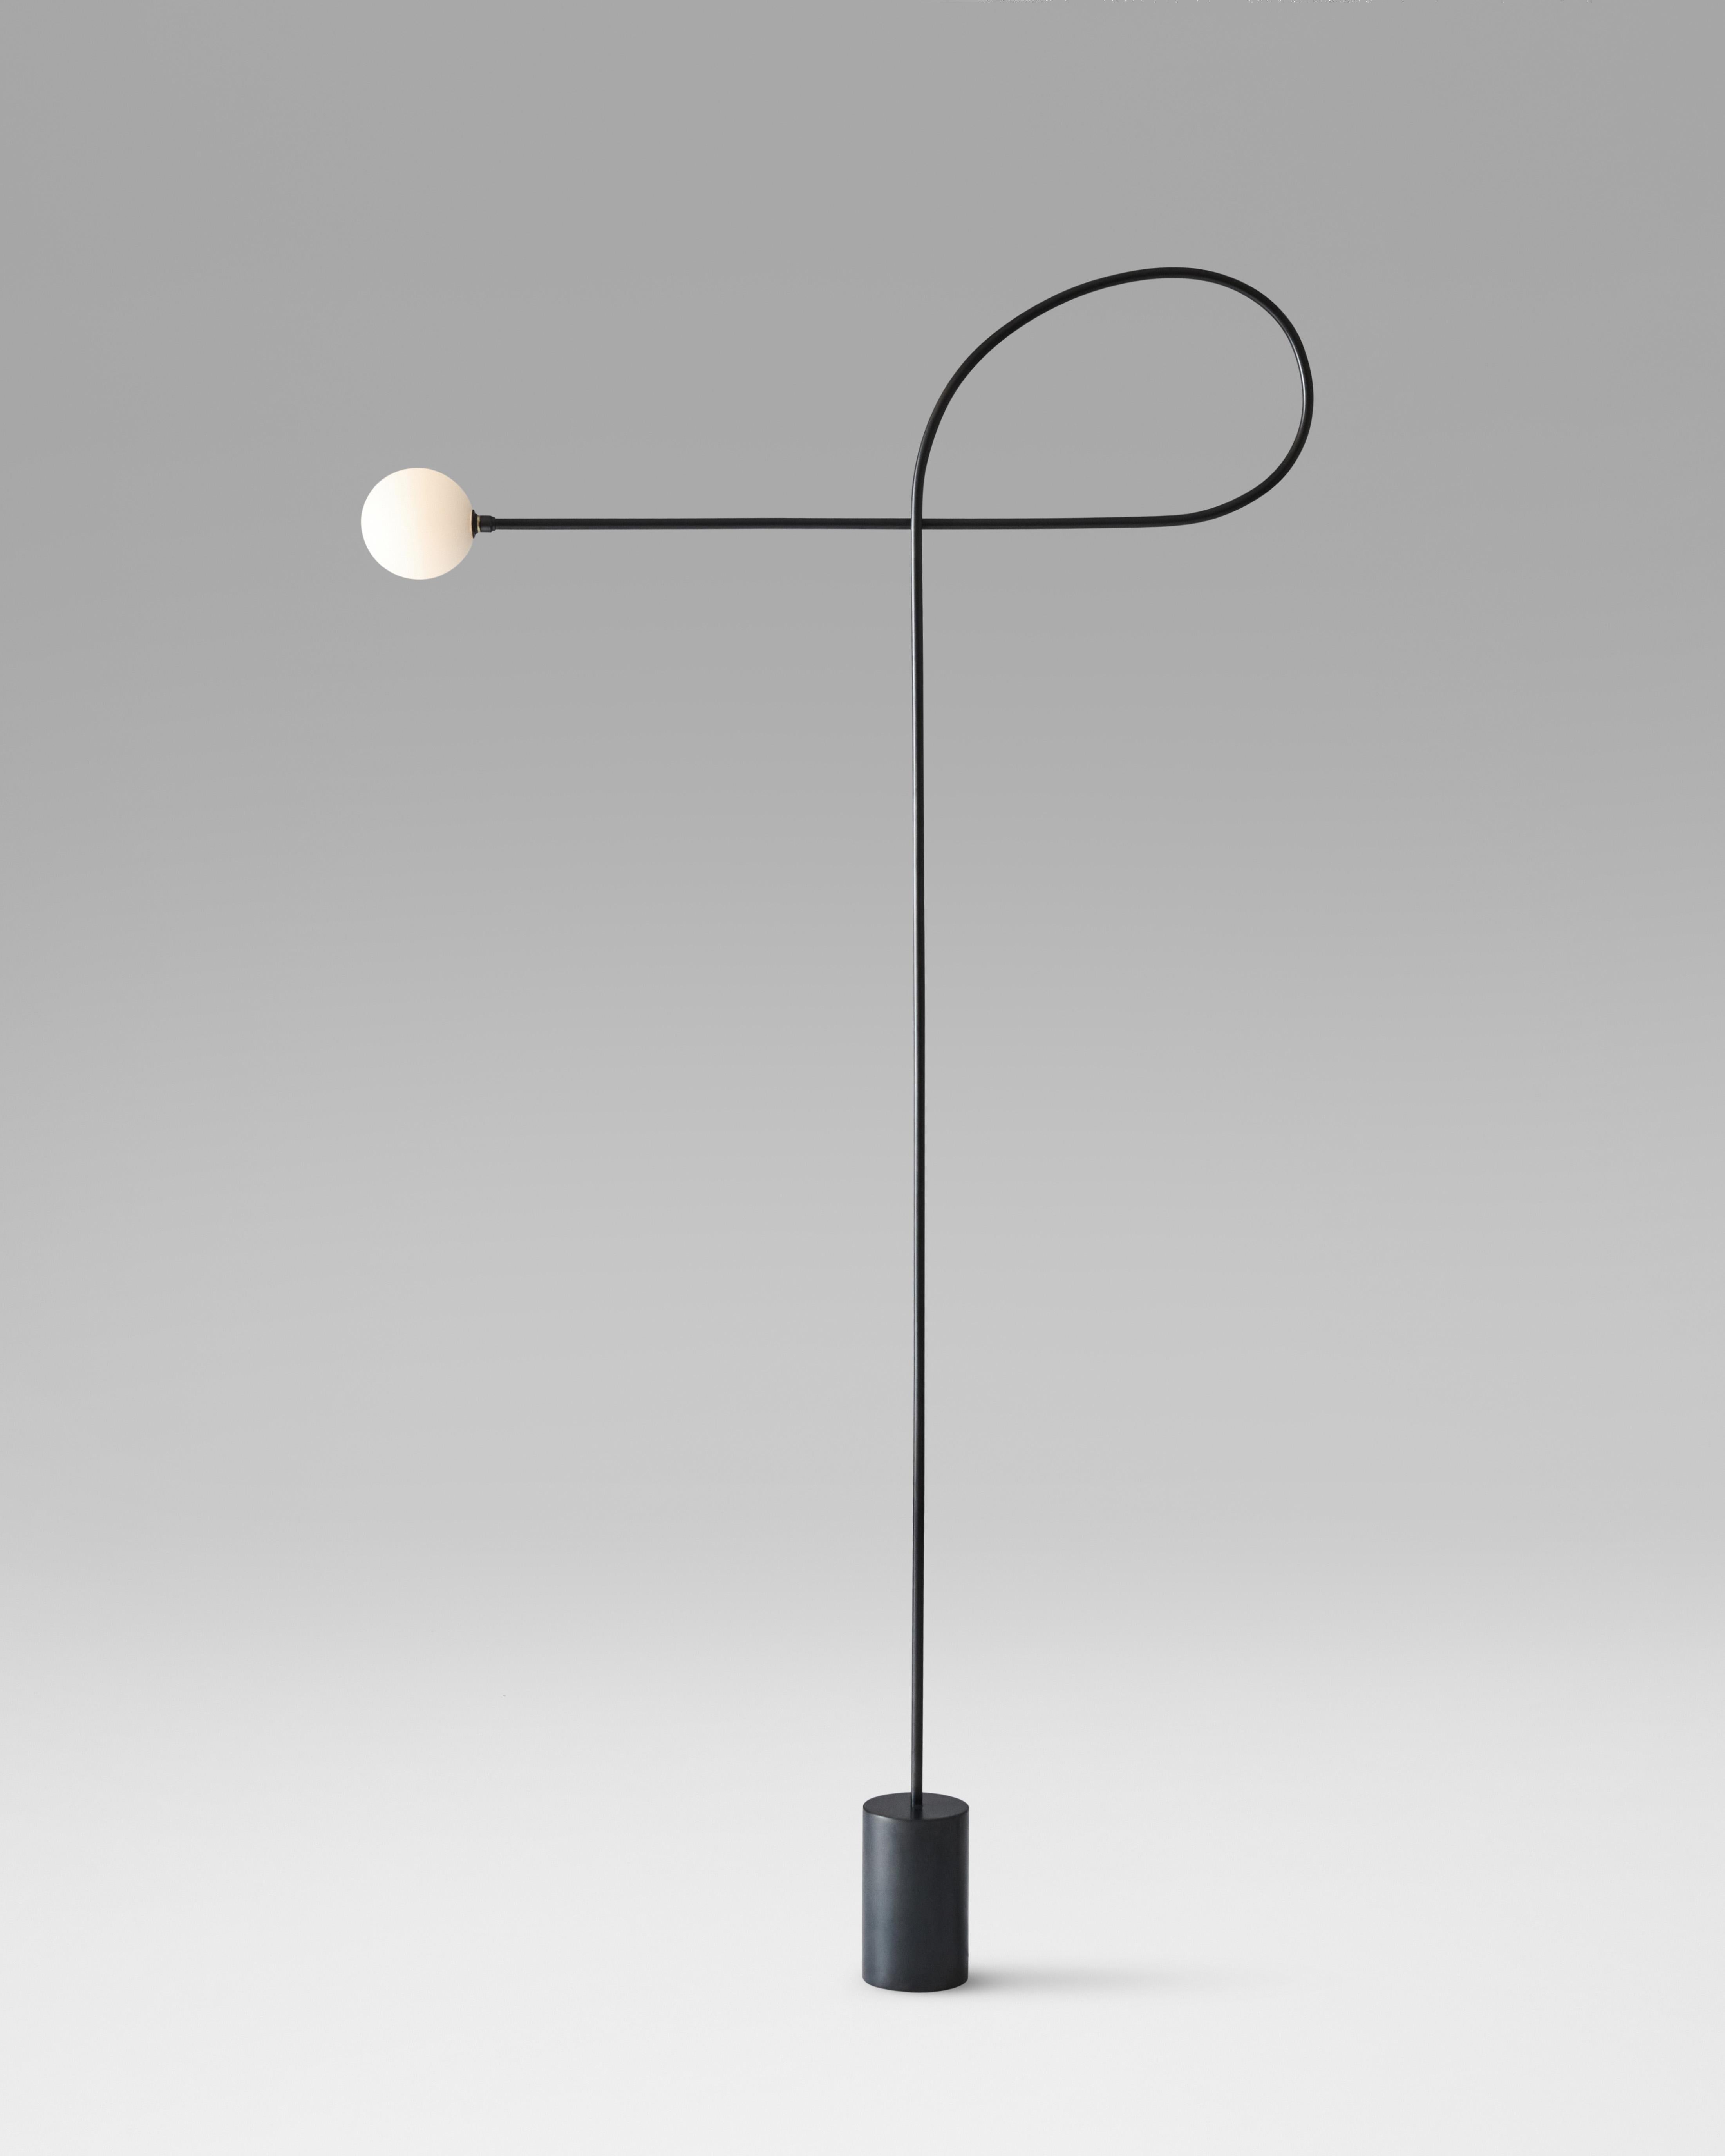 Bow floor lamp made of blackened steel and hand blown glass. Finished with a black, fabric-covered electrical cord. An LED bulb creates a soft, even glow.

Materials: Steel, hand blown glass

This item is designed and handmade to order in Los